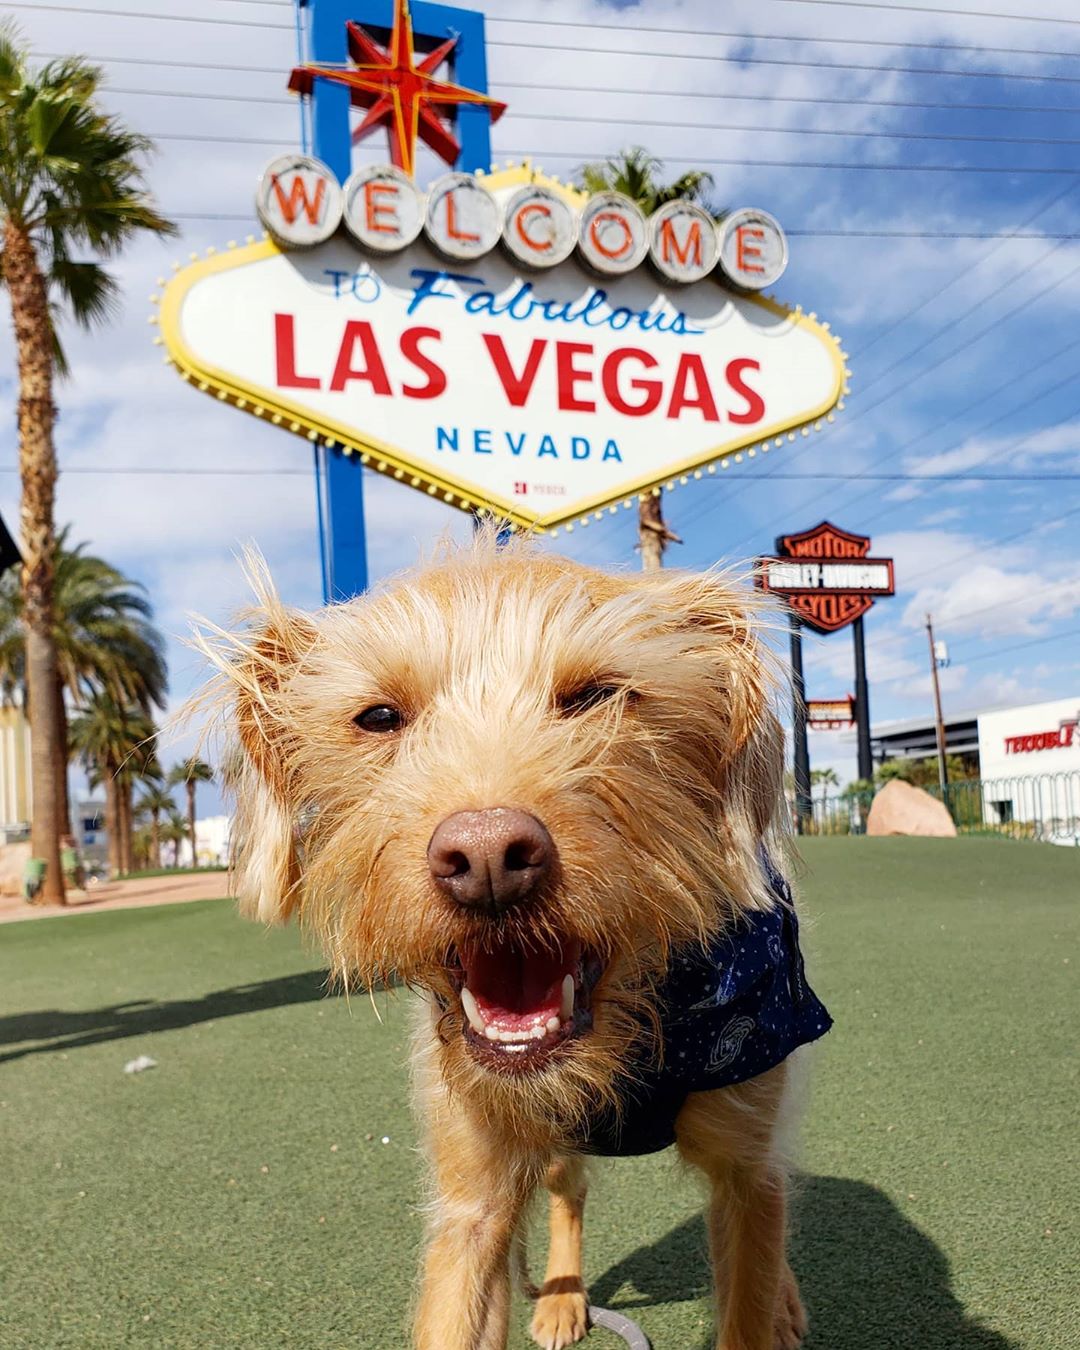 small dog standing in front of the Welcome to Las Vegas sign photo by Instagram user @winstonthedtladog